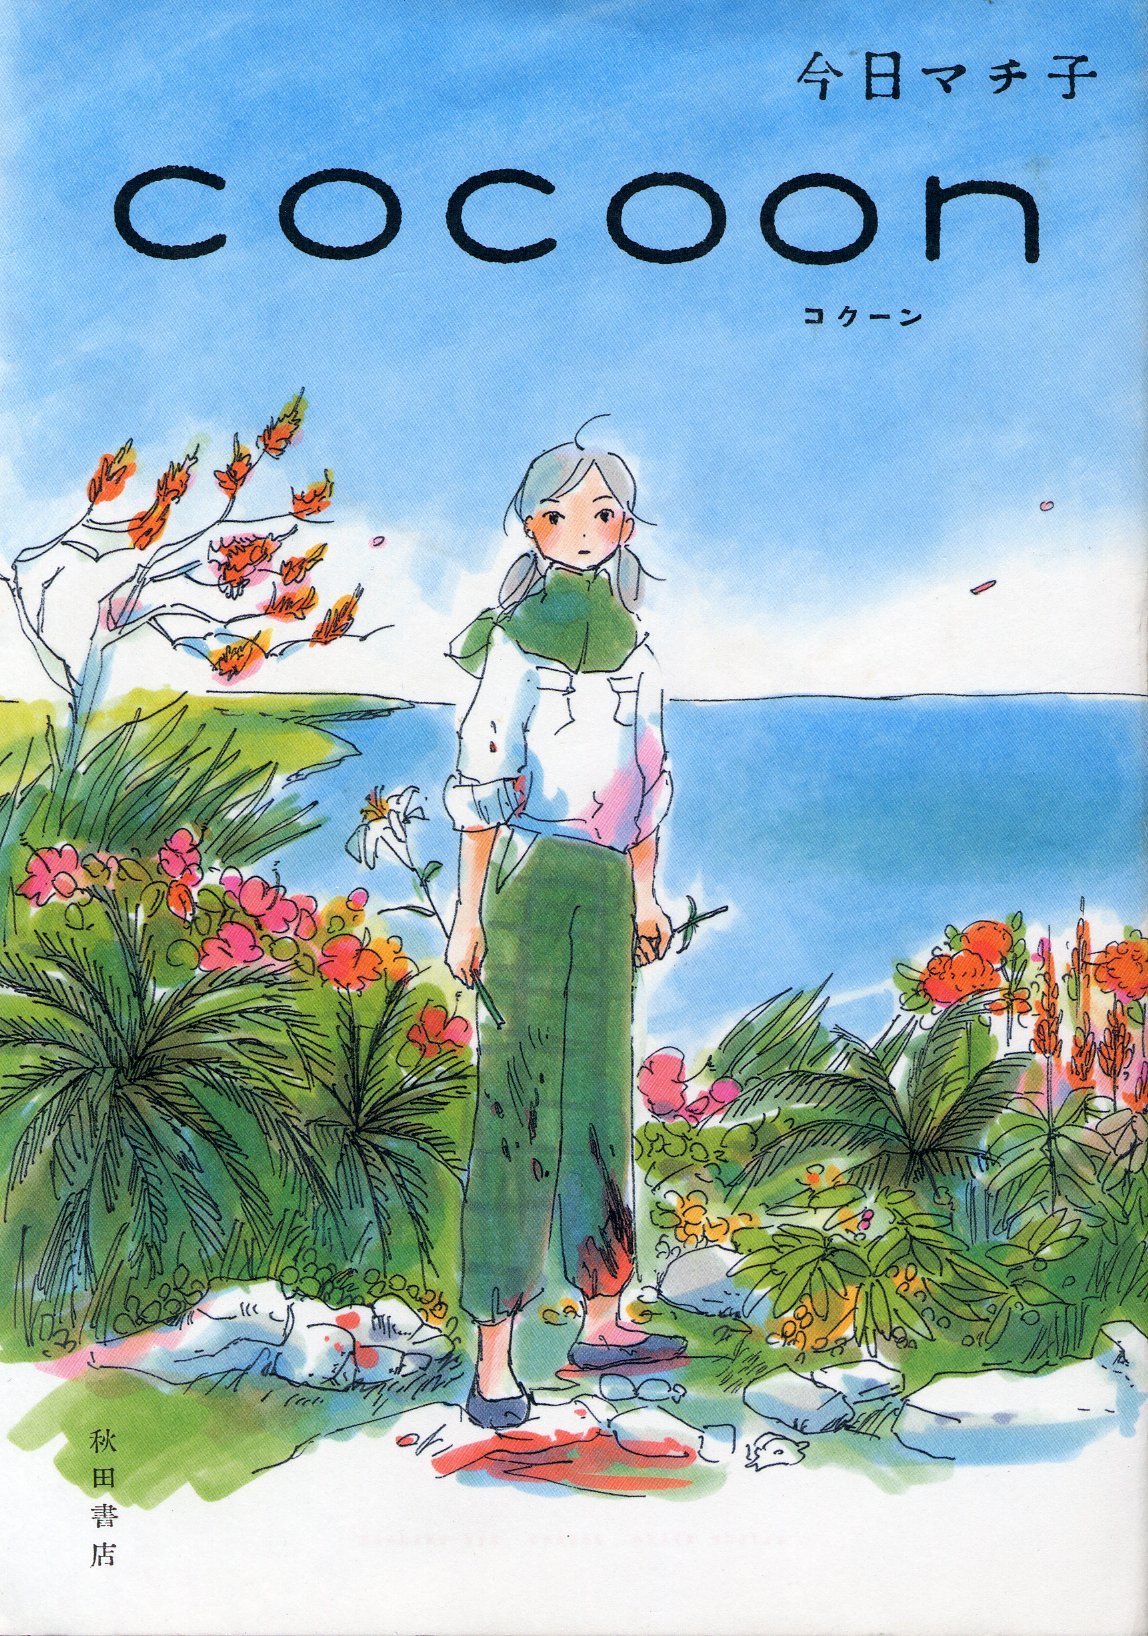 『cocoon』（今日マチ子/秋田書店）